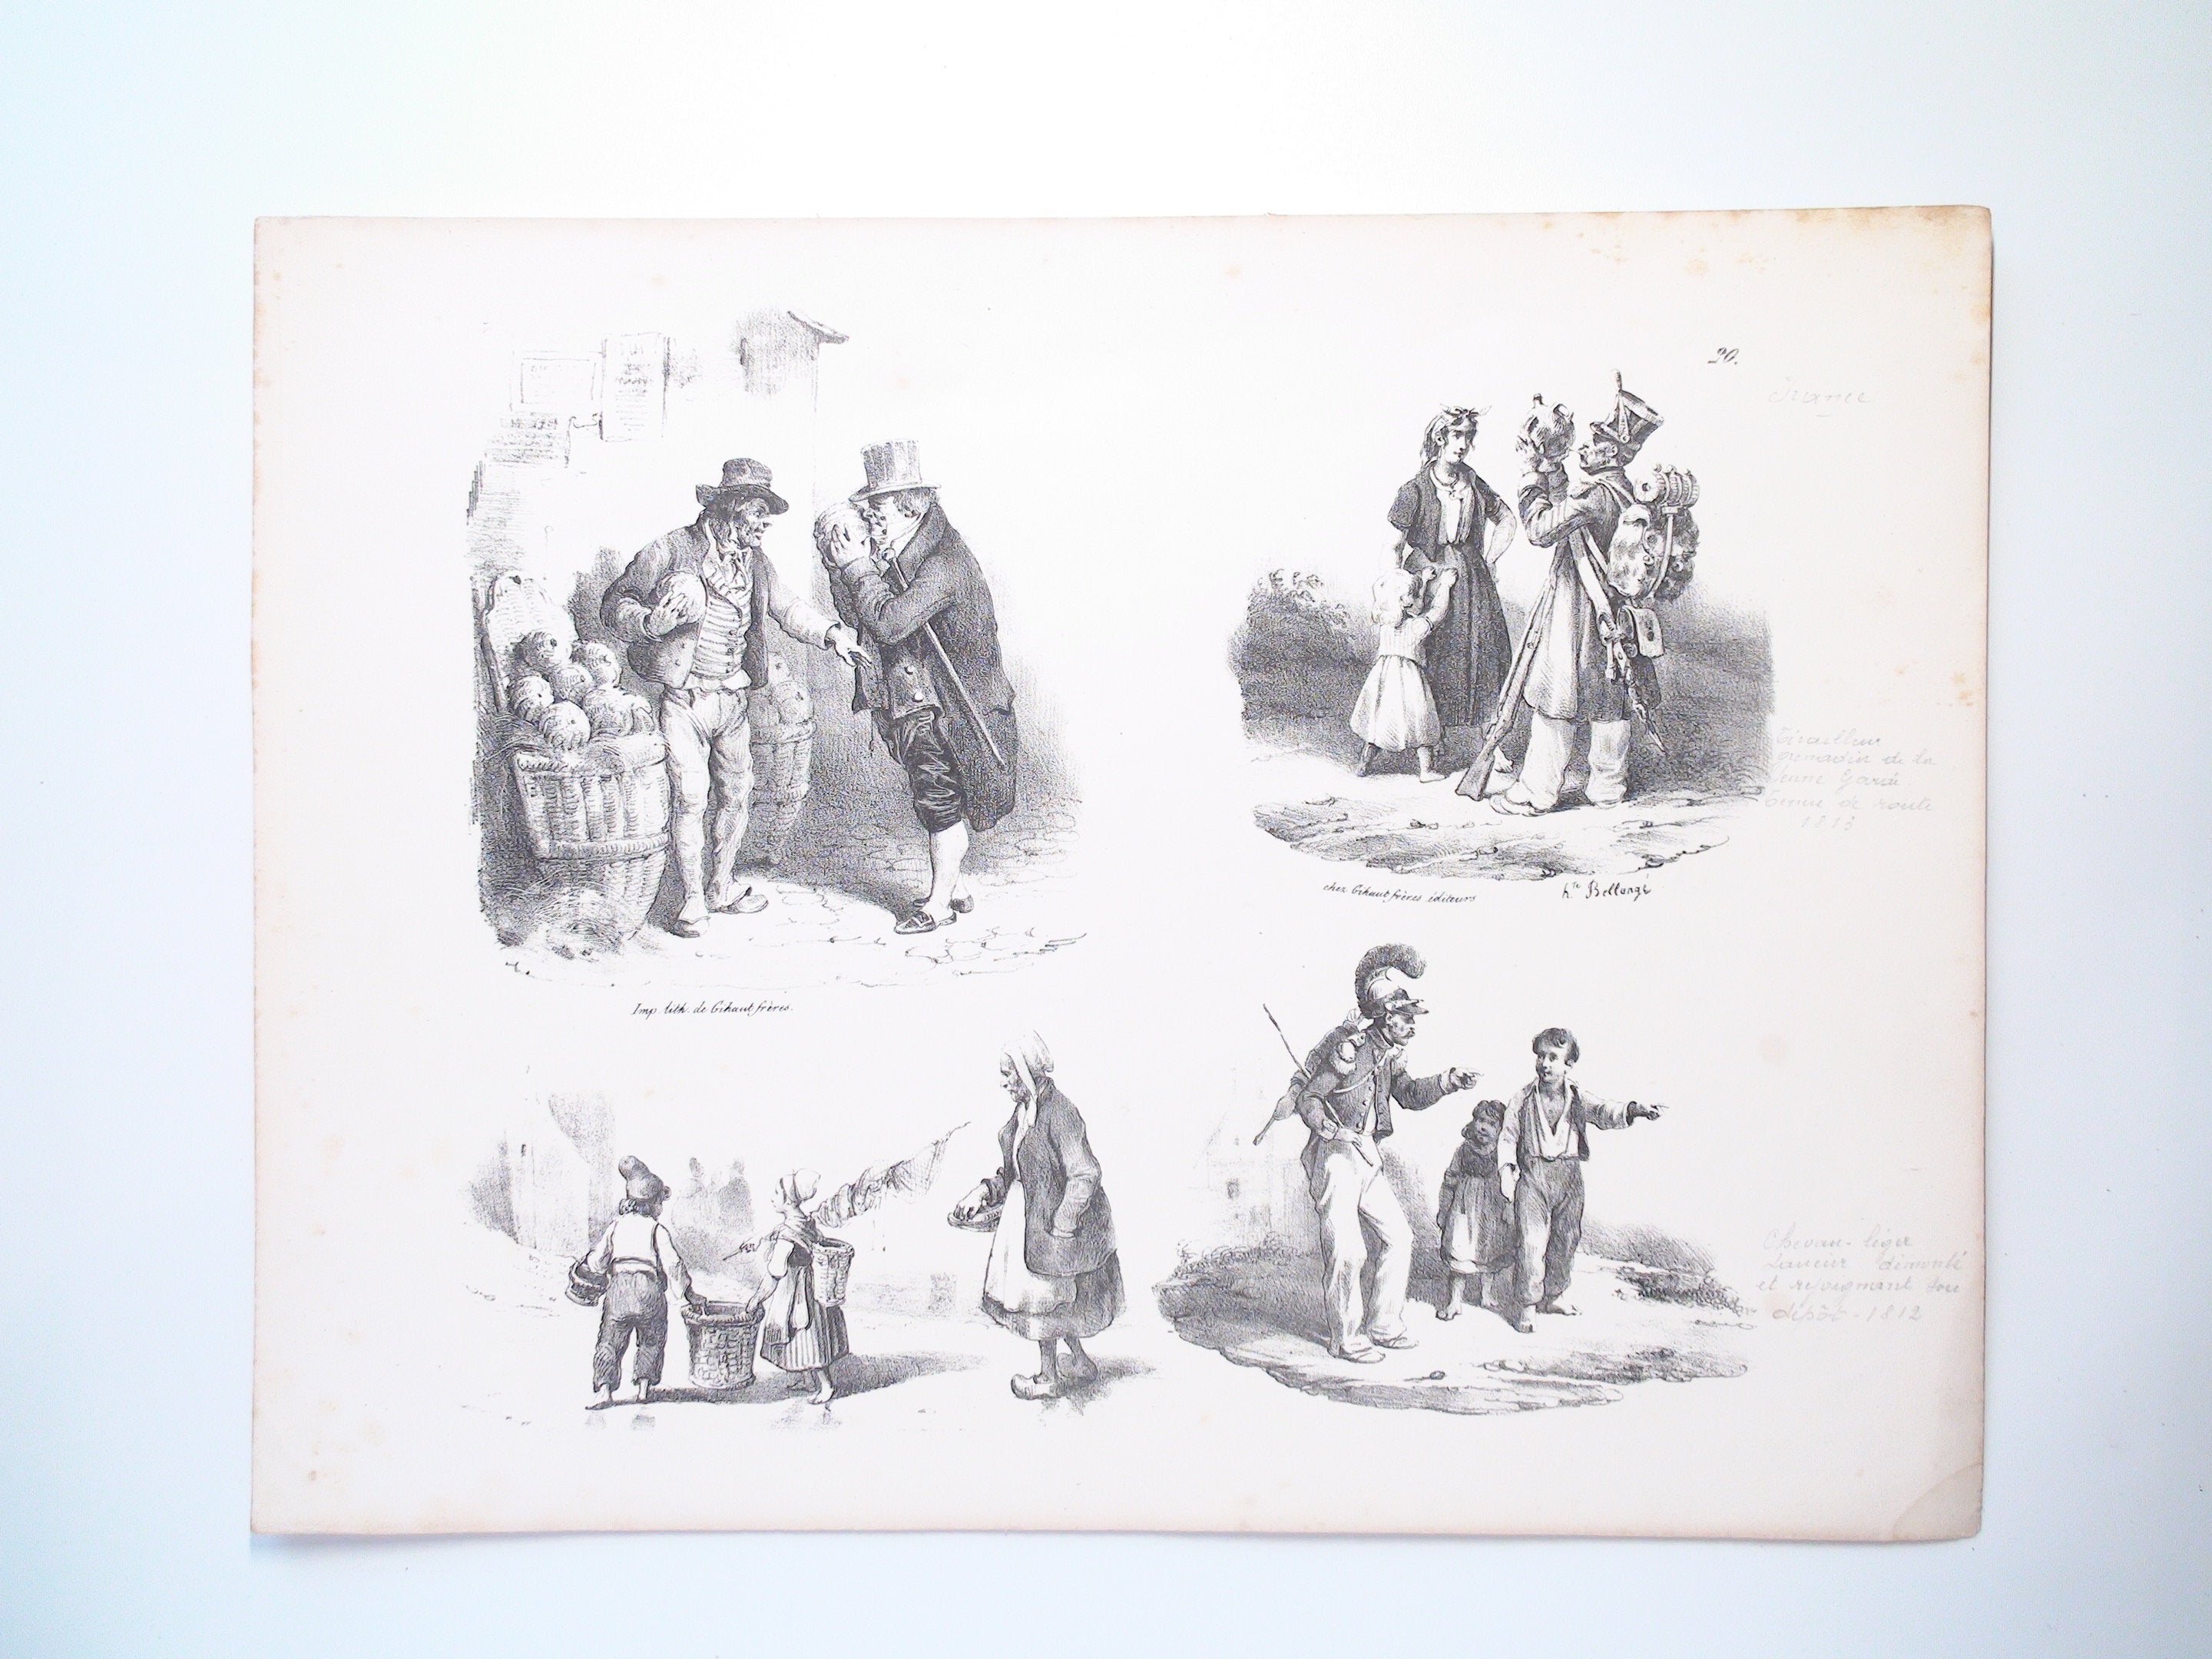 Lithograph of Peasants and Soldiers, Chez Gihaut Frères, Éditeurs, c1812